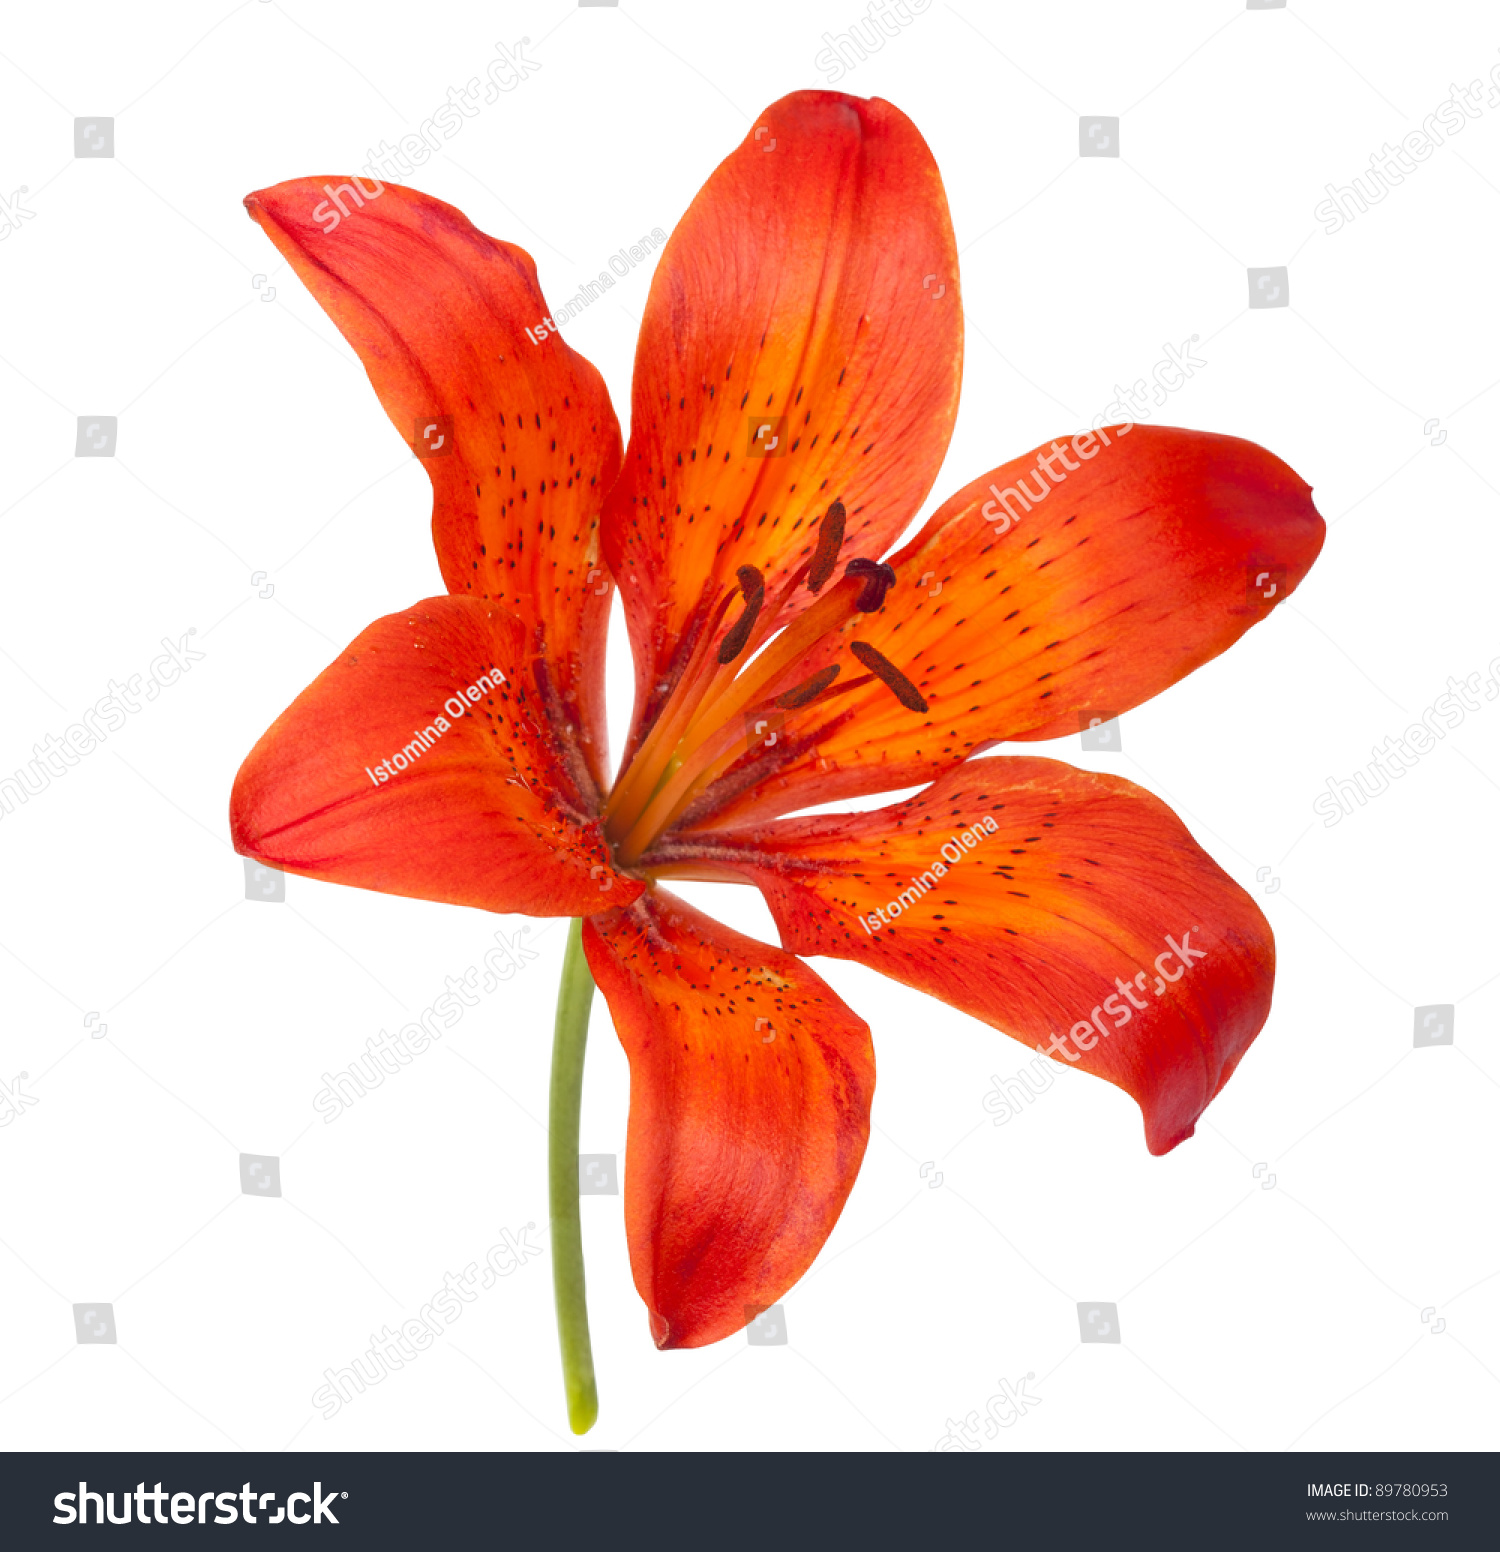 tiger lily clipart - photo #36